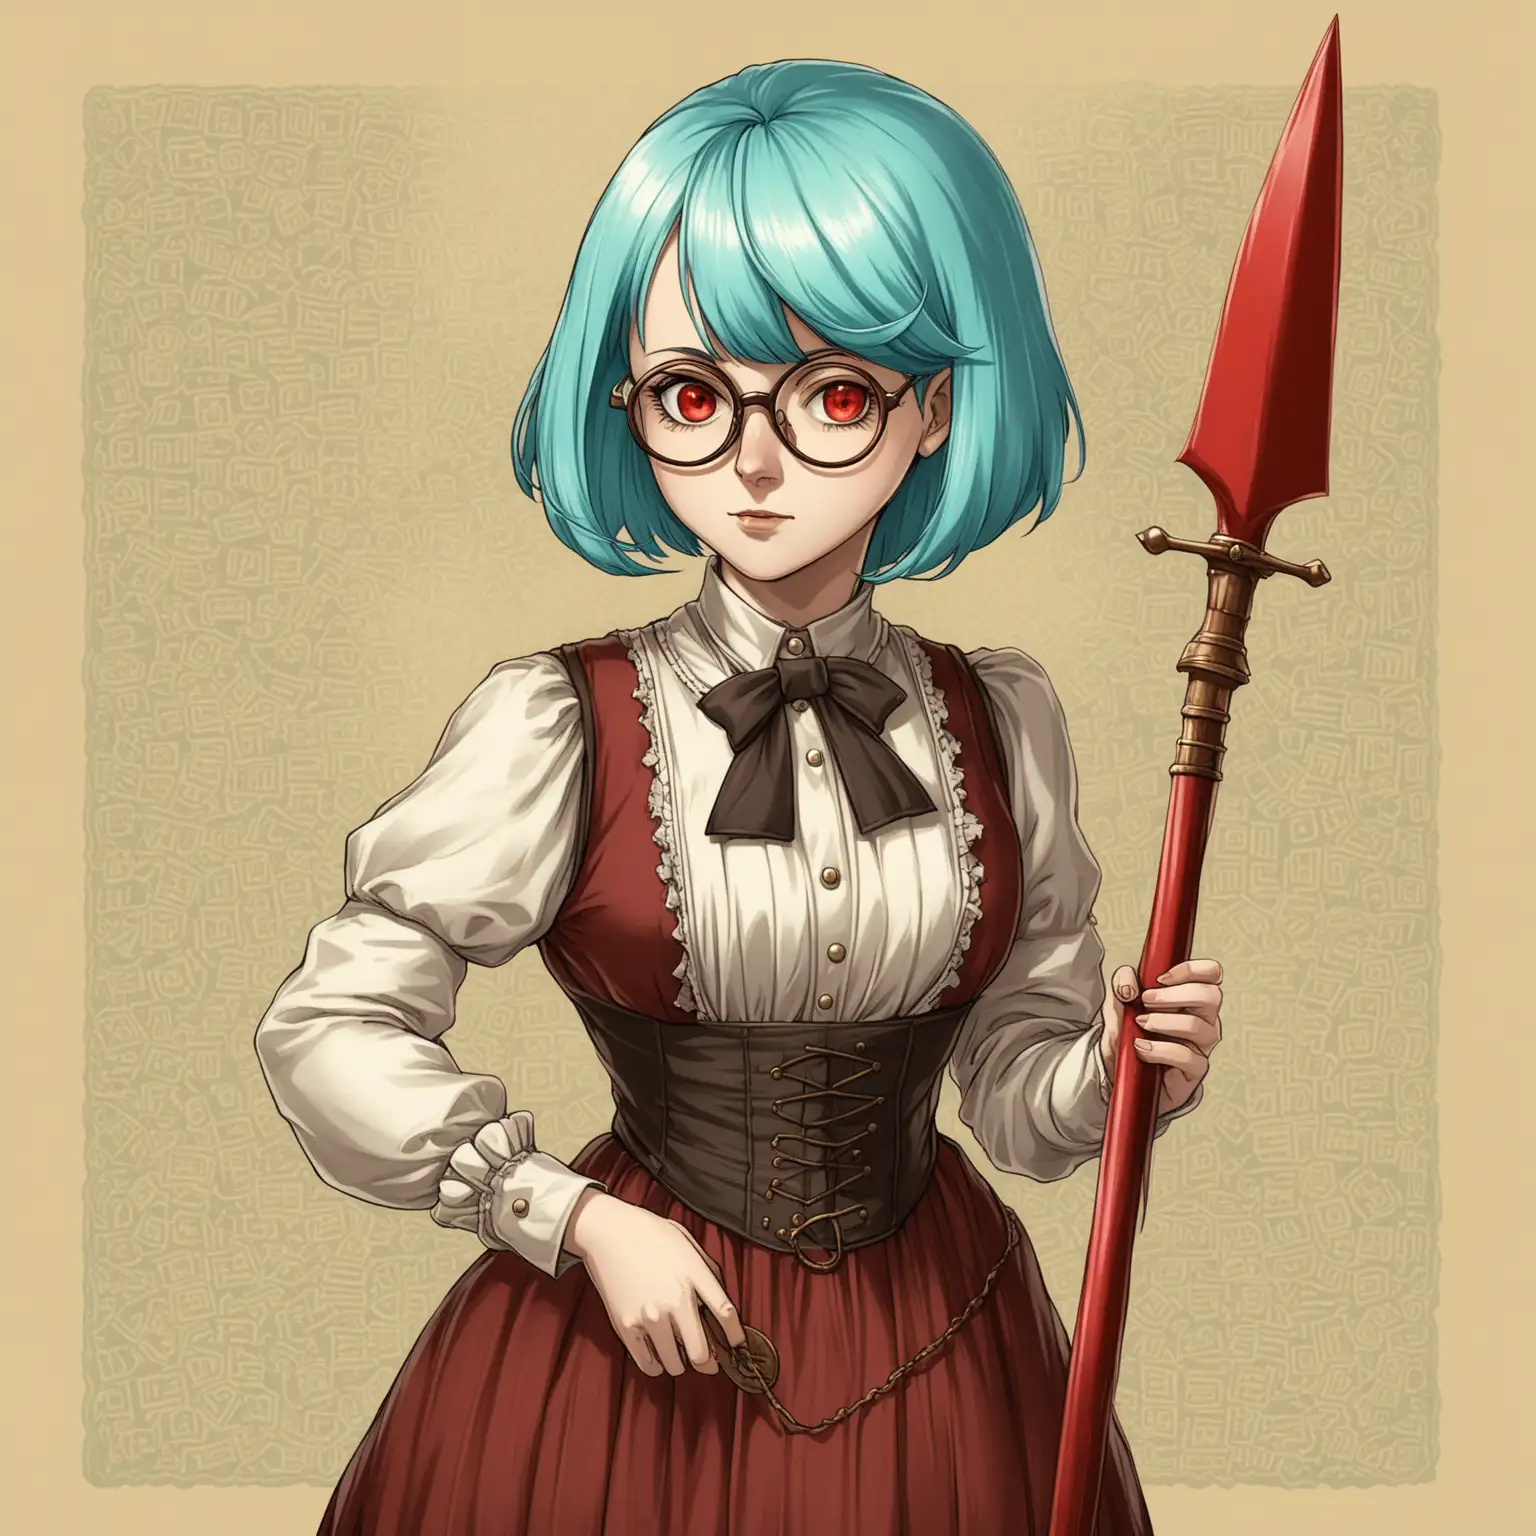 Female, short cyan hair, red eyes, old timey outfit, glasses, red spear